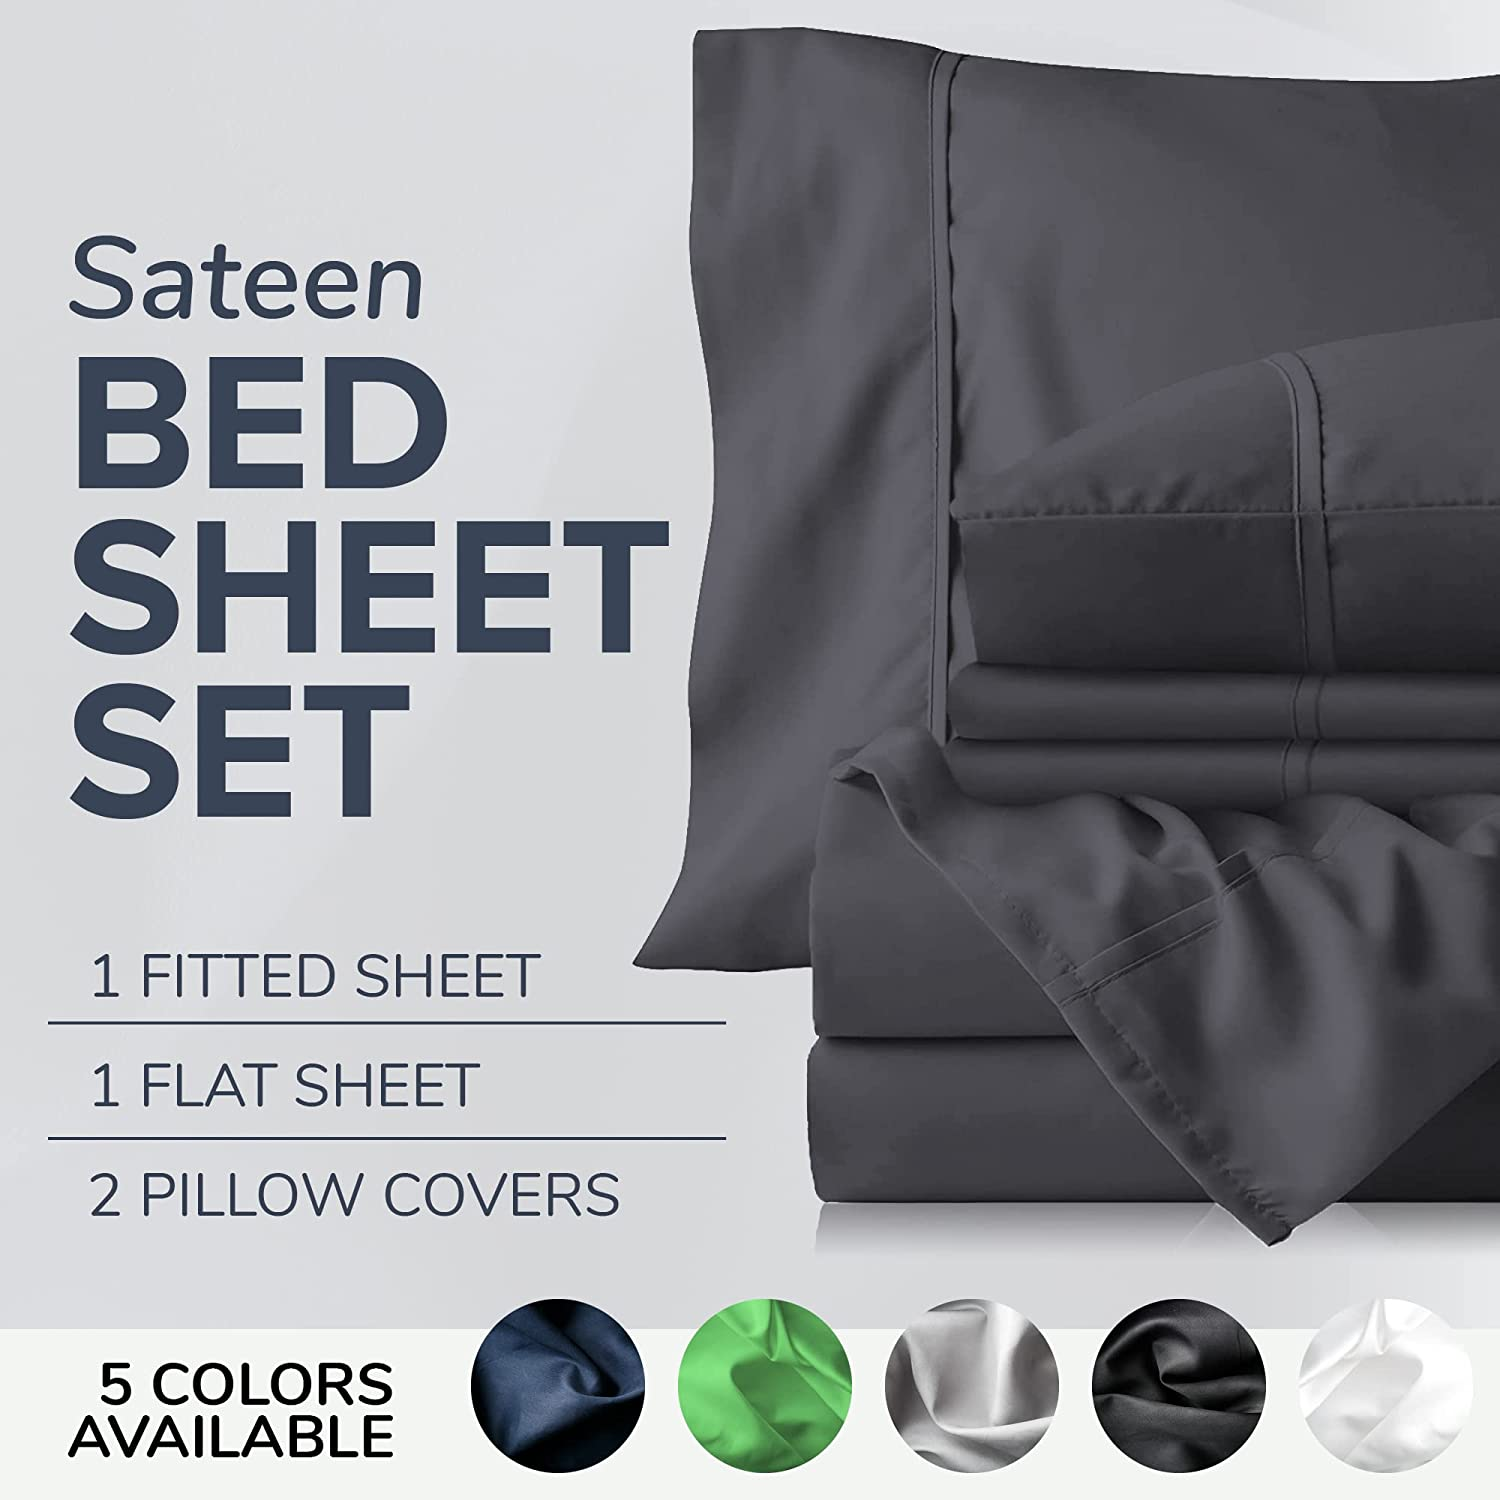 Stony Edge Bed Sheets for King Size Beds, 300 Thread Count, 100% Cotton, Extra Long Staple Yarns, Set of 4 Sateen Weave Gray Bed Sheets & Pillowcases